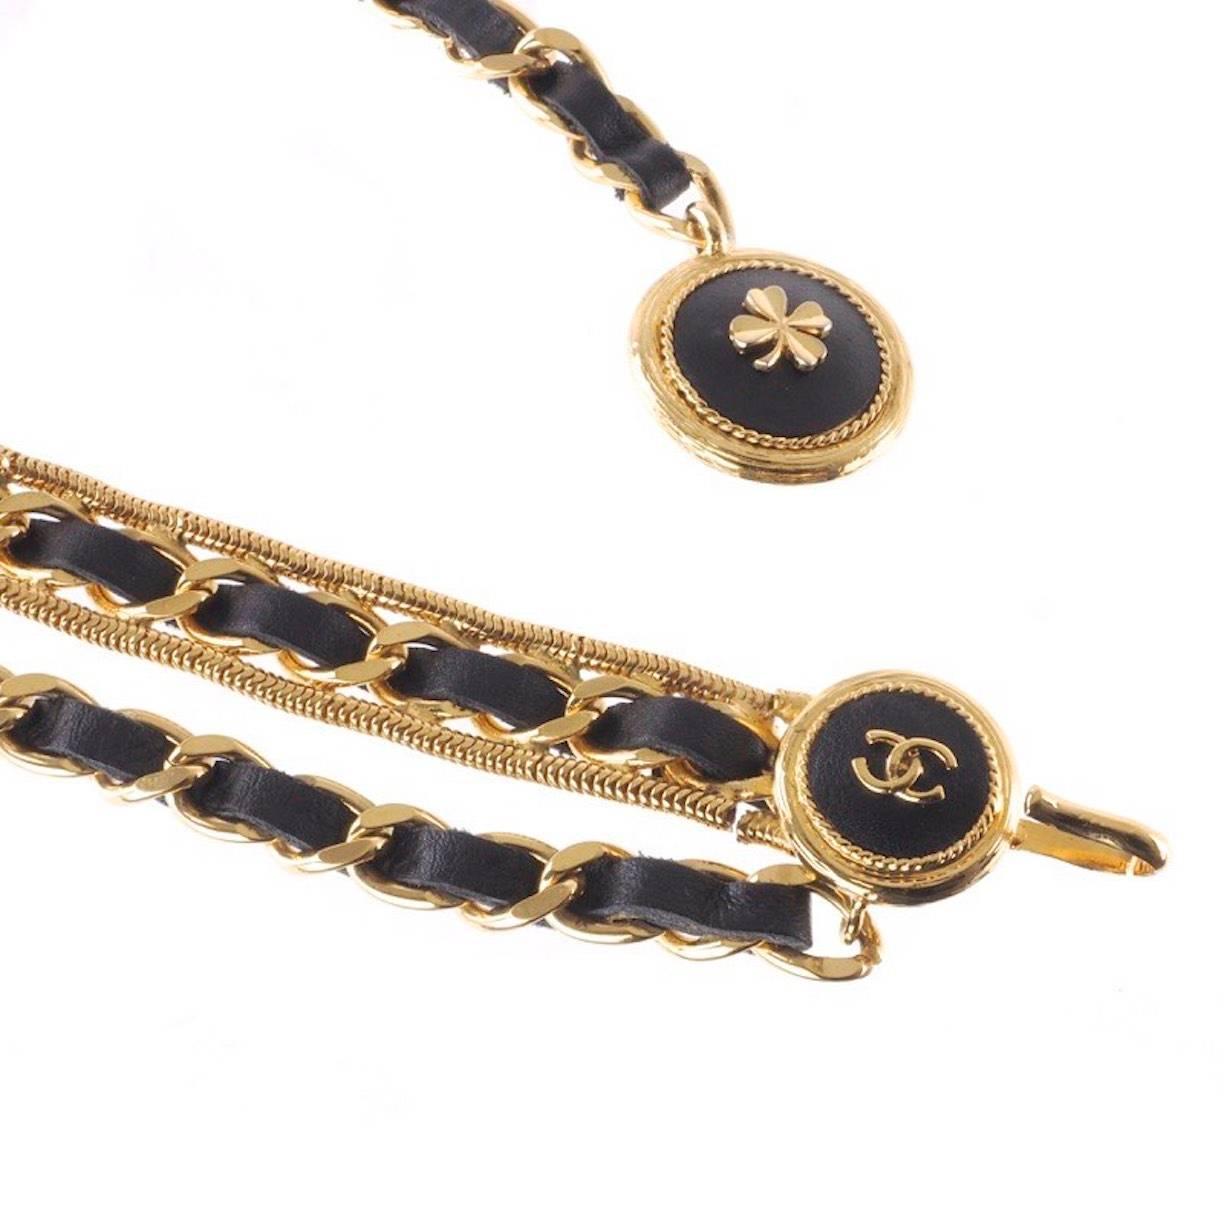 CURATOR'S NOTES

Style Tip: Dangle this chic belt around your neck and rock as a statement necklace for ultimate versatility!

Metal
Gold tone
Leather
Hook closure
Made in France
Total length 35